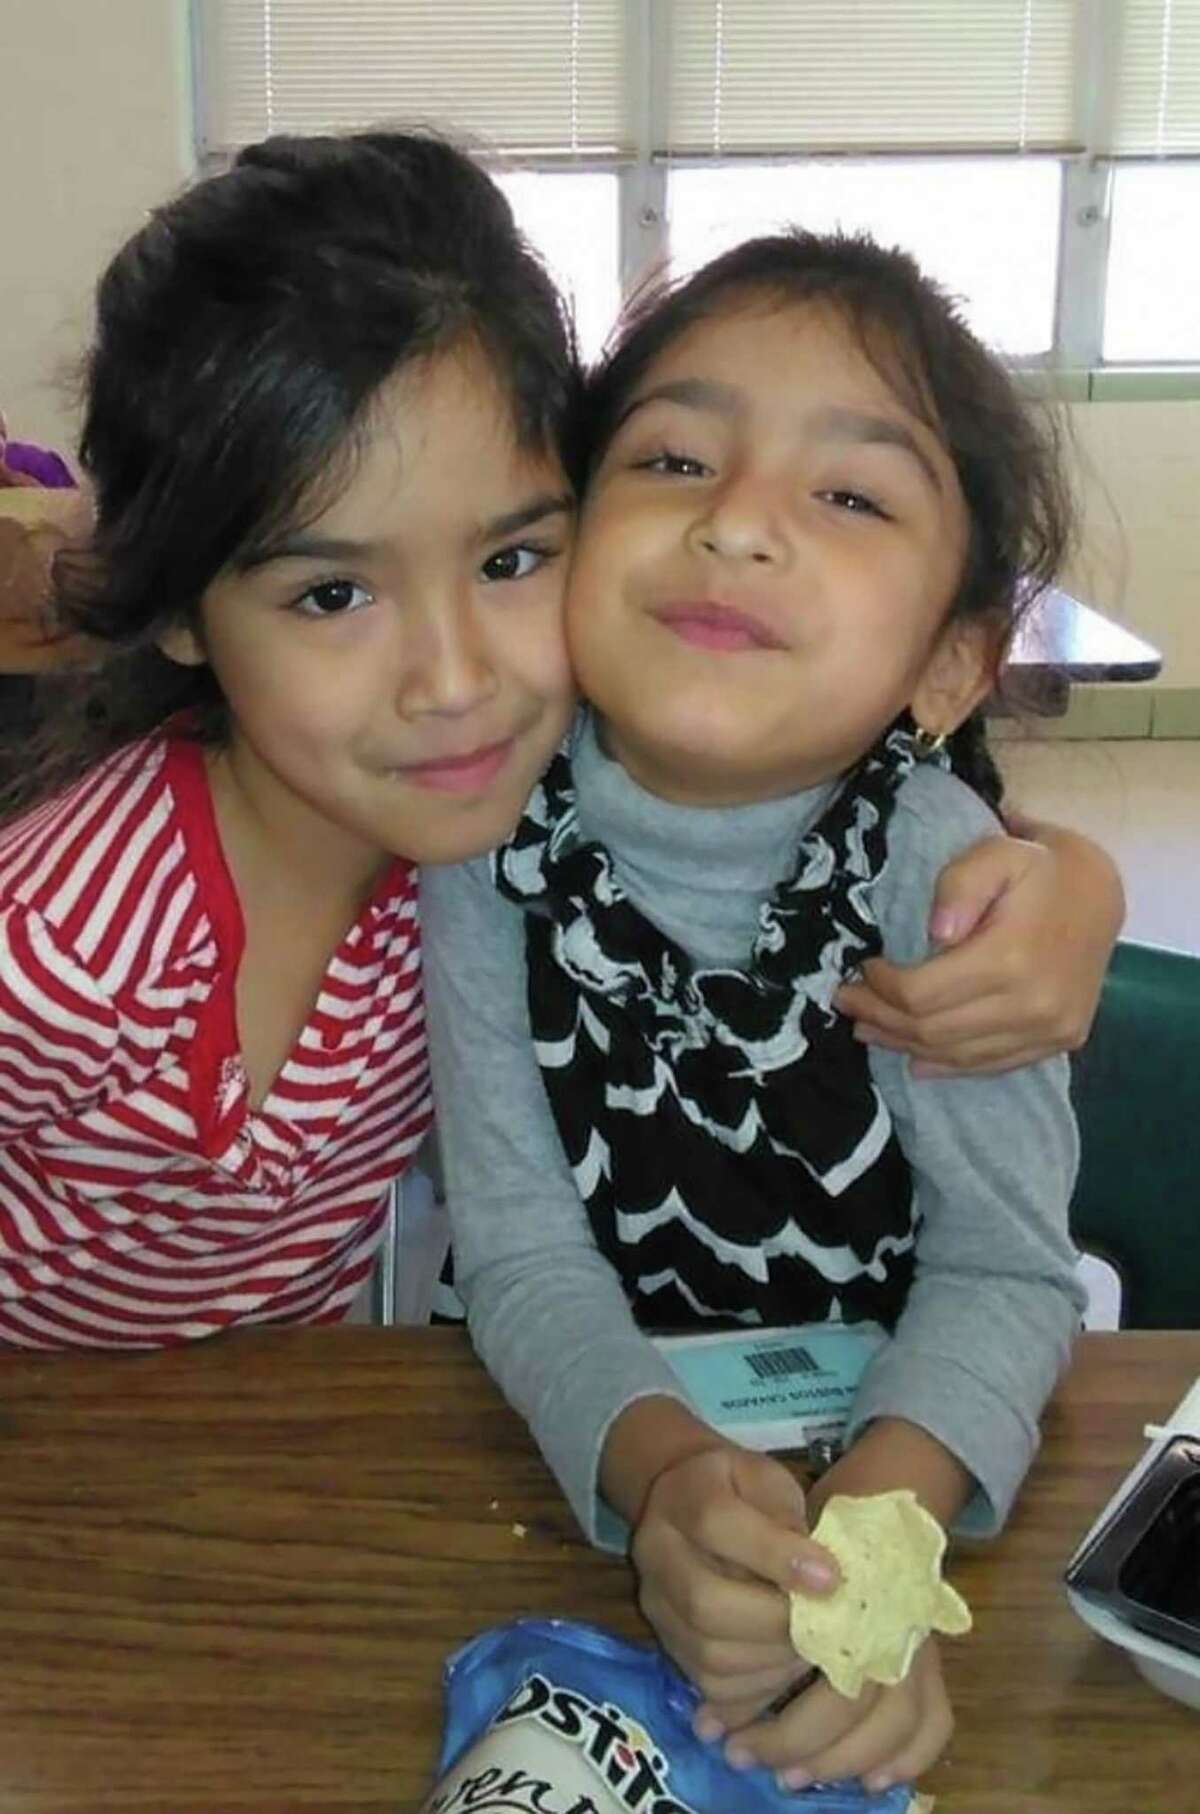 Healey Cavazos, left, and her sister, Leann Cavazos, died from carbon monoxide poisoning along with their father Thomas Cavazos. They were discovered in their home on Monday.